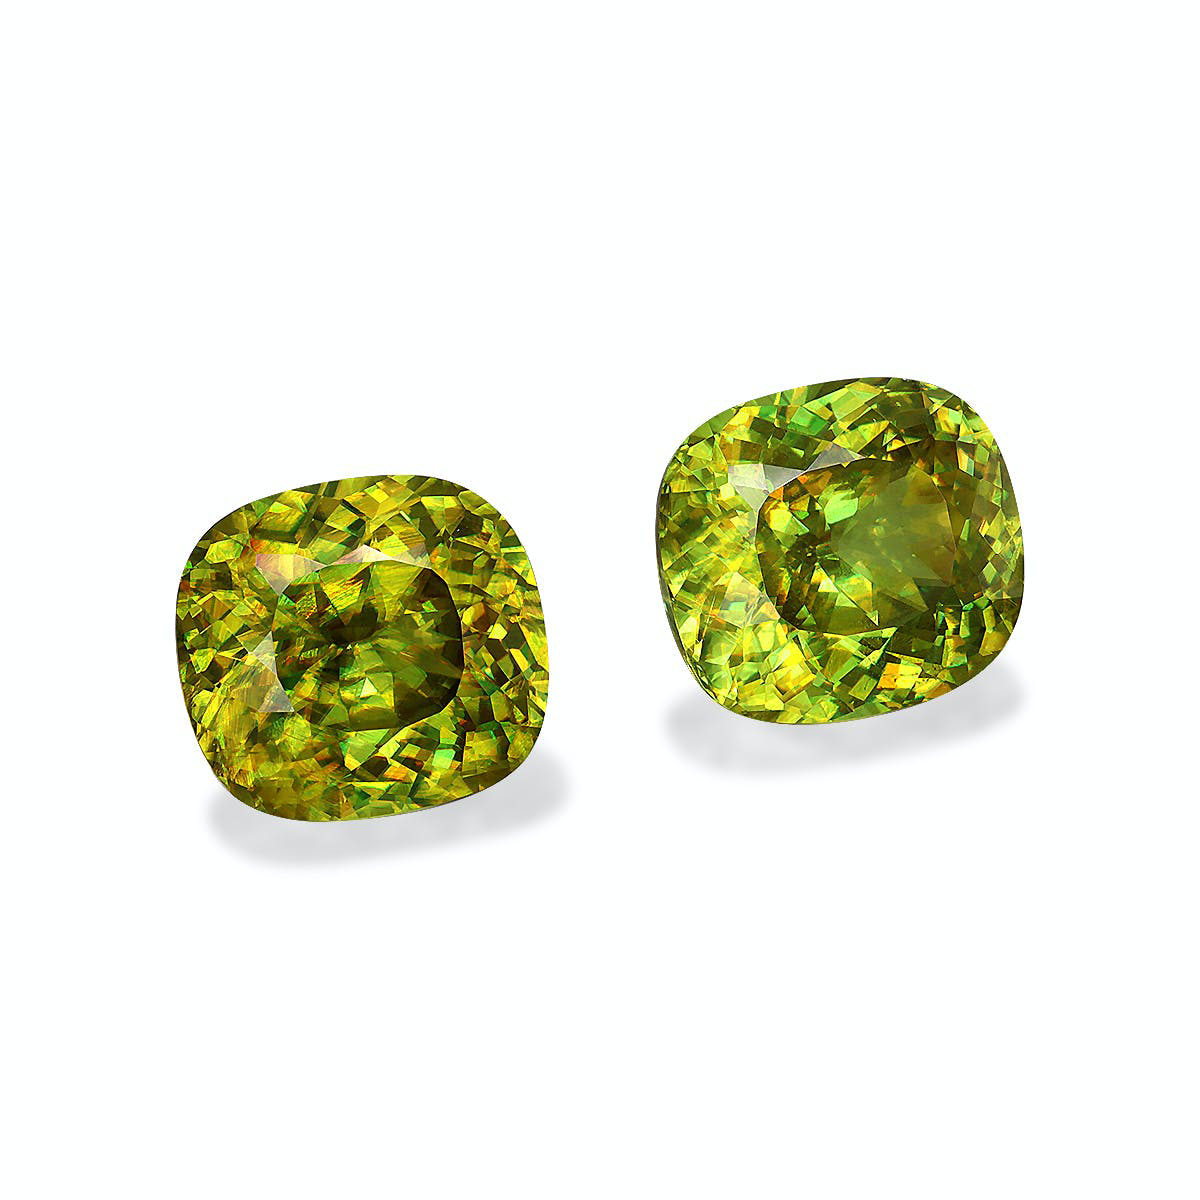 Picture of Lime Green Sphene 9.71ct - Pair (SH1113)